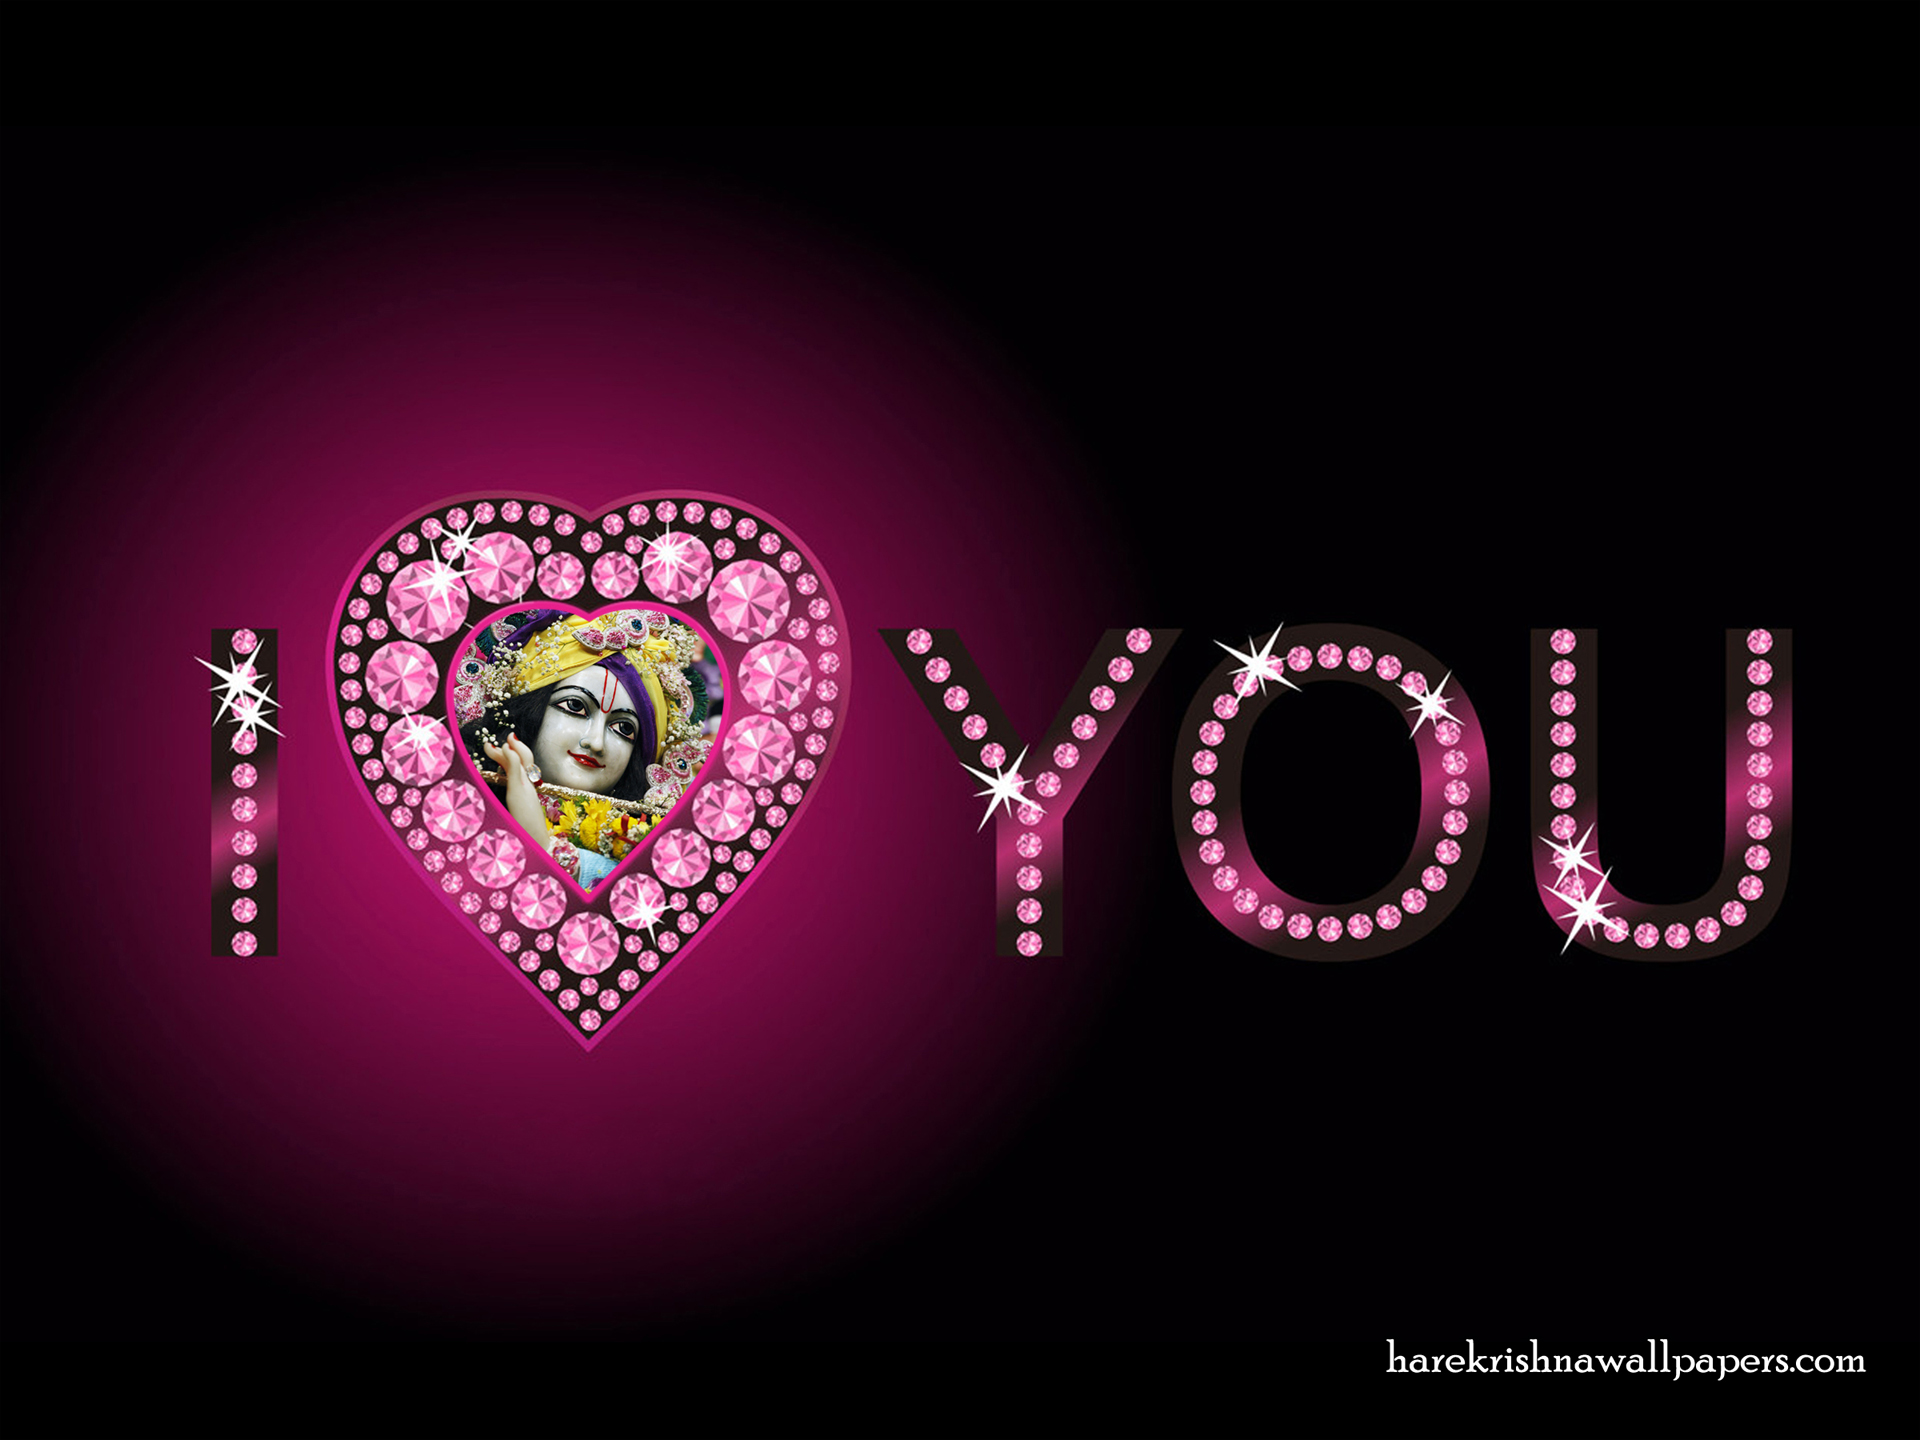 I Love You Gopinath Wallpaper (002) Size 1920x1440 Download